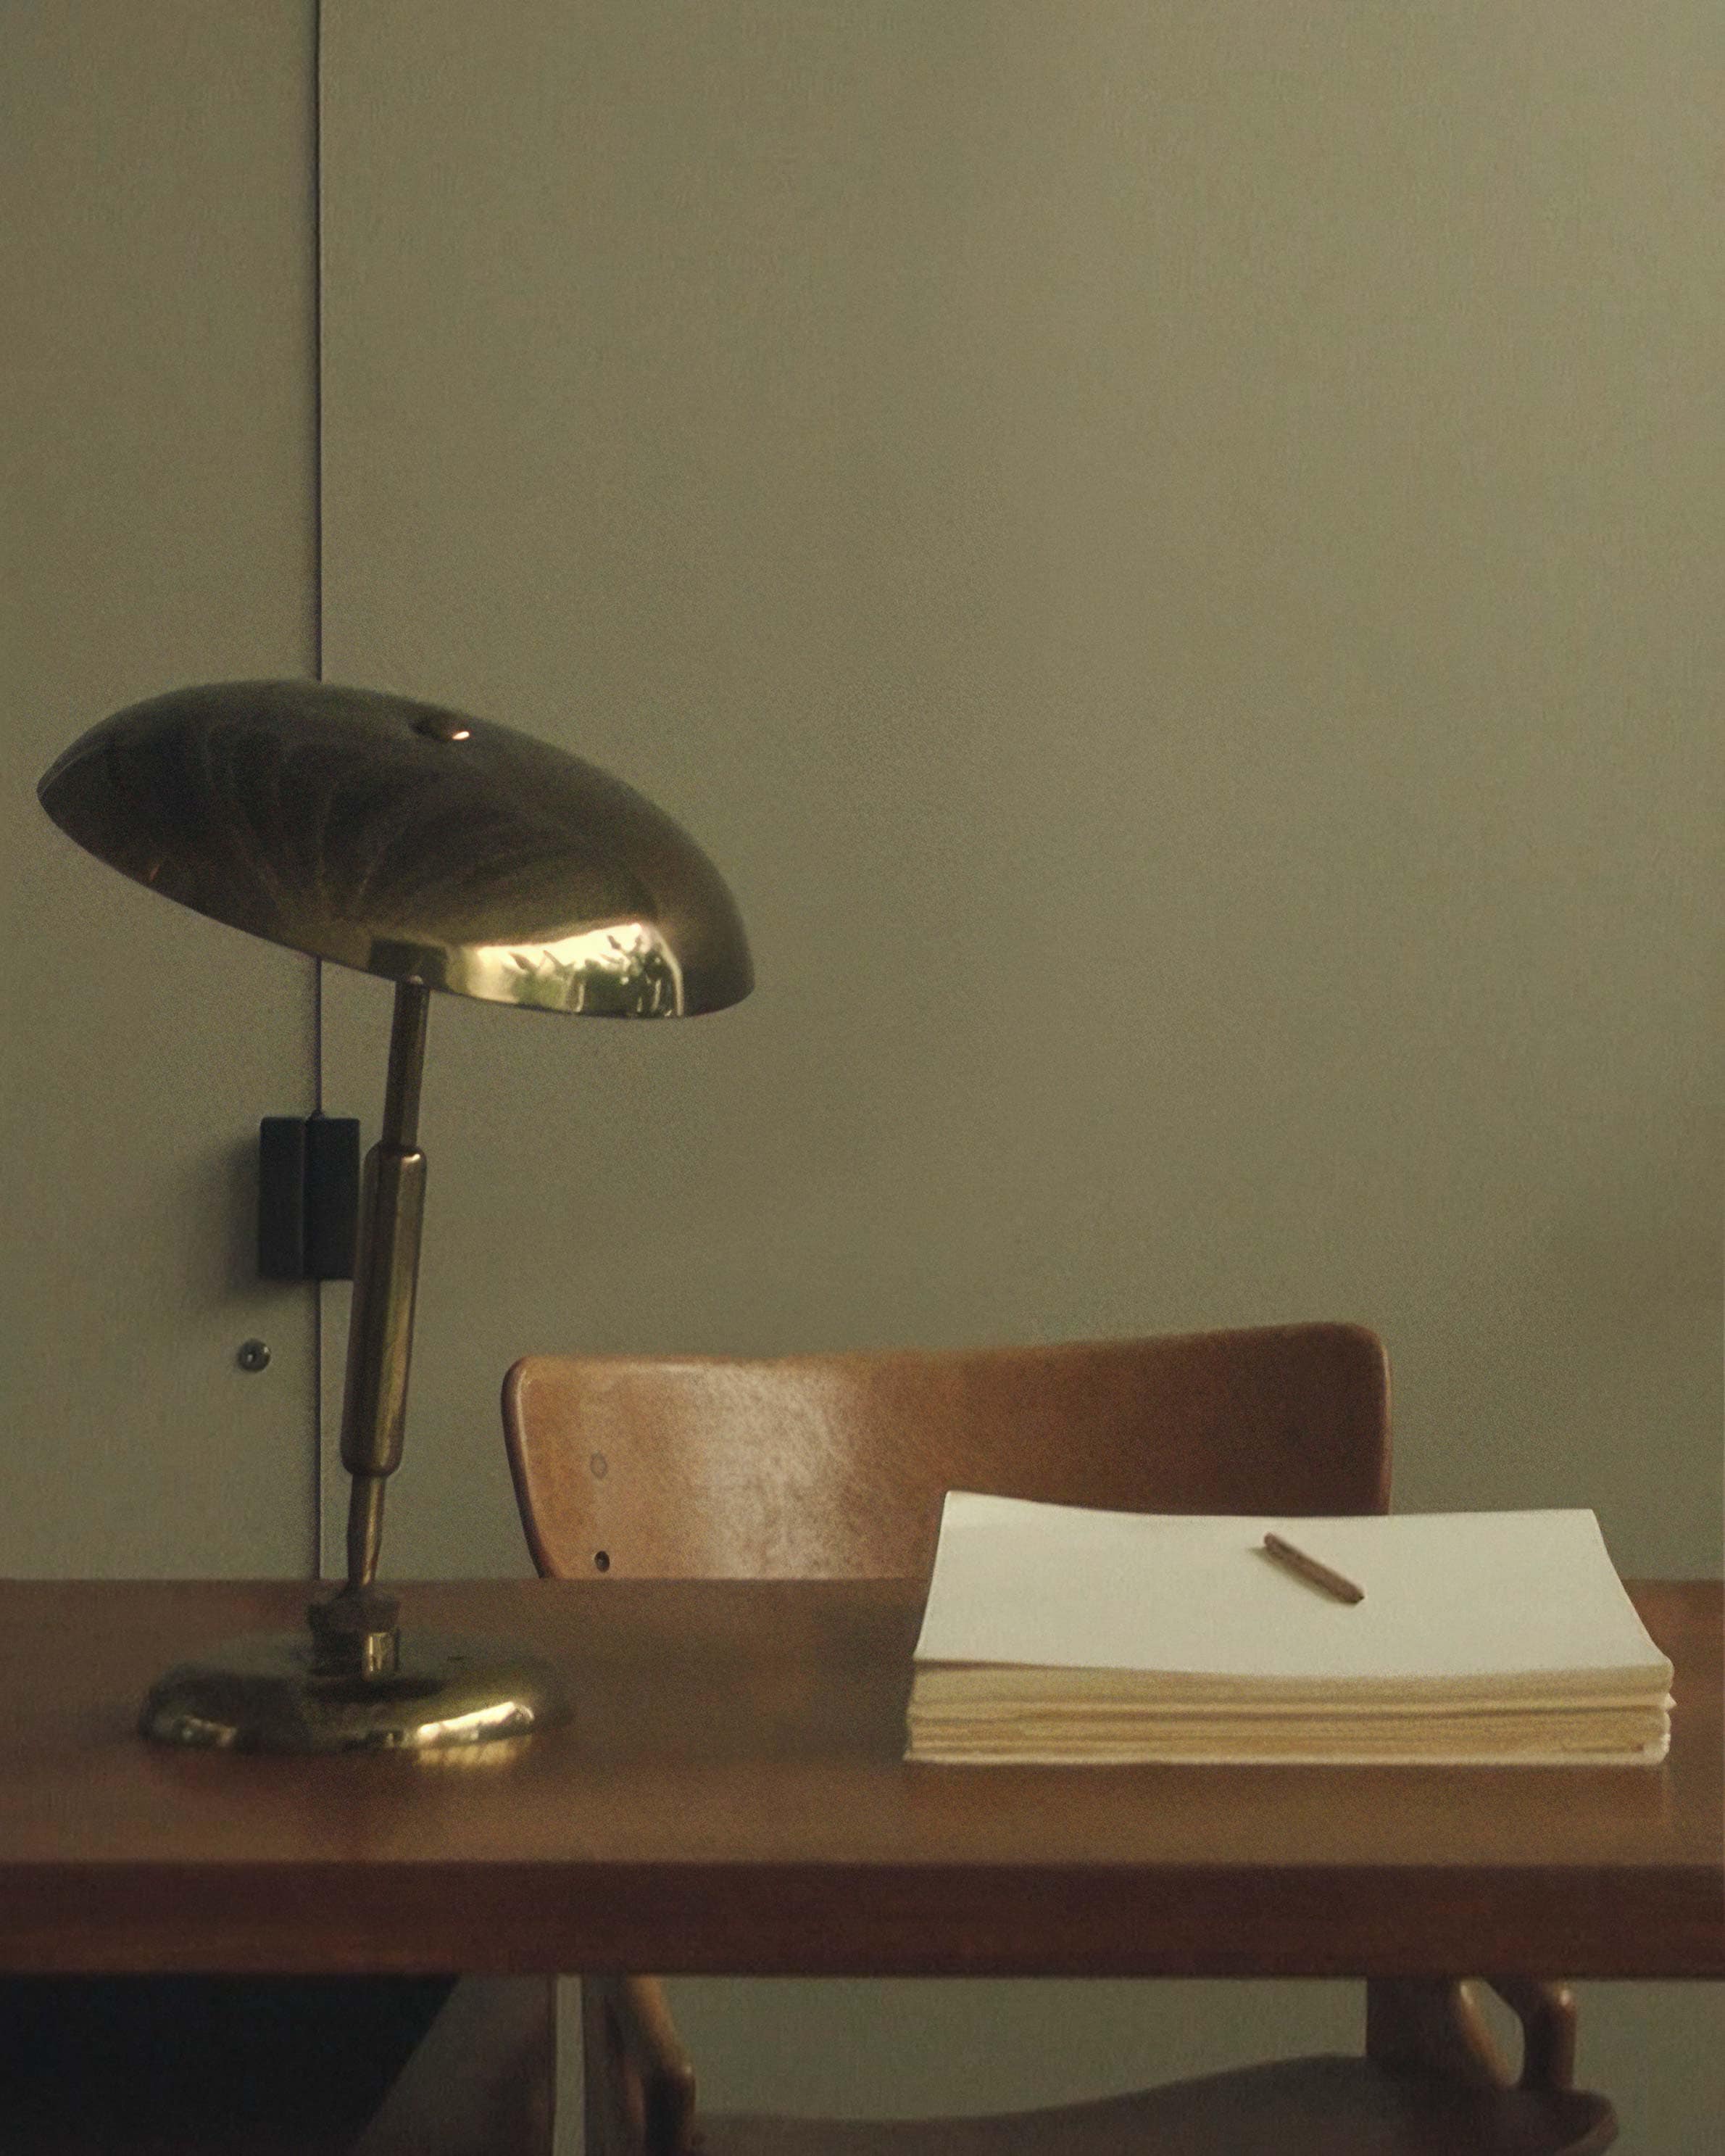 A lamp, papers and a pen placed on a wooden table